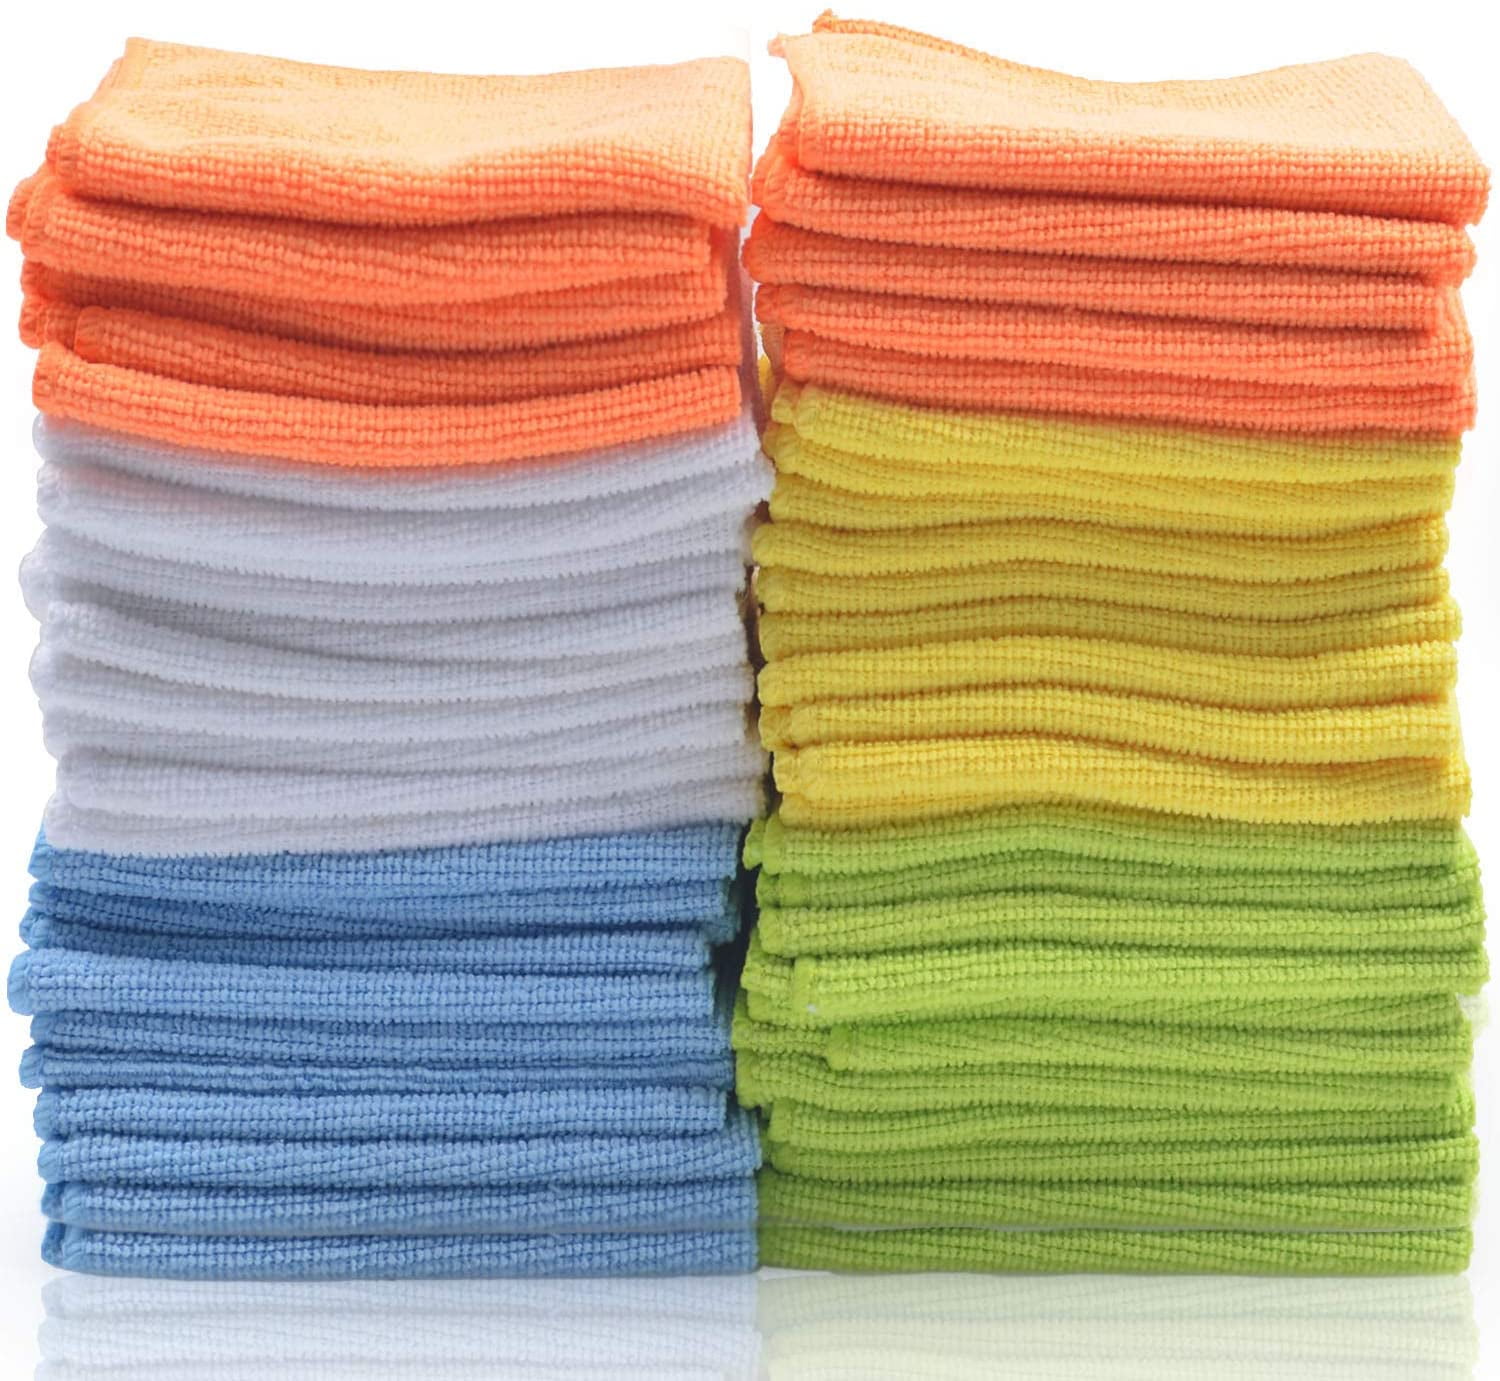 4 NANO Technology Super ultra microfiber cleaning cloth Best absorbent.14X14" 